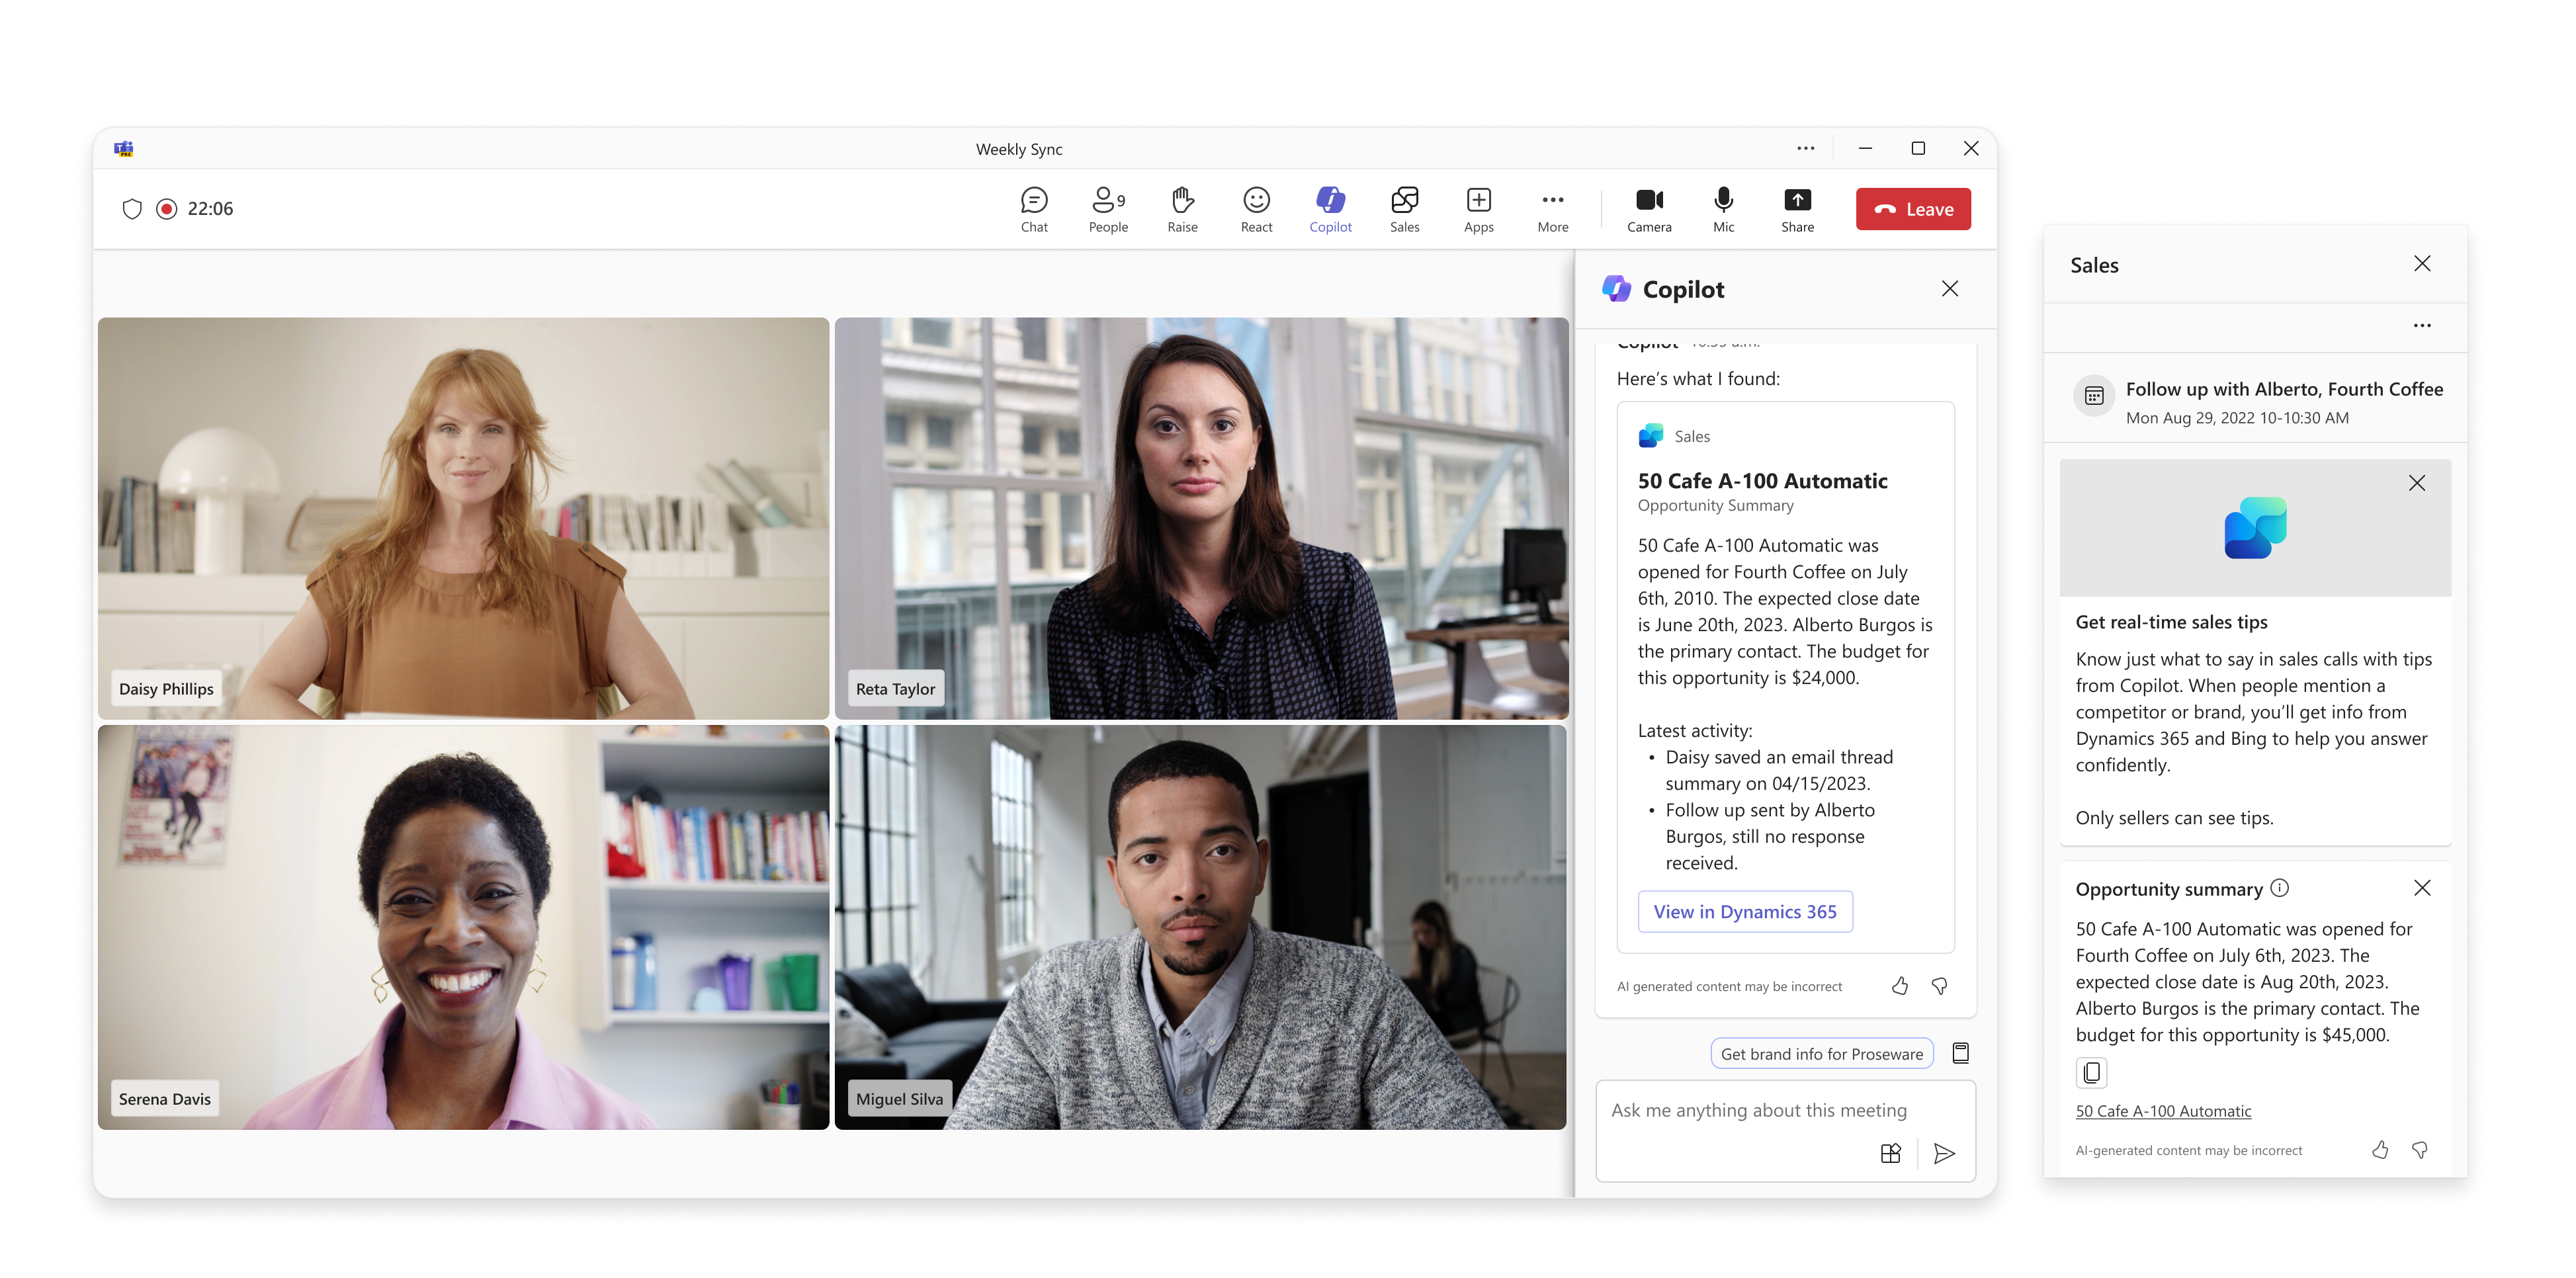 An active Microsoft Teams call with 4 people to discuss a sales opportunity. Copilot for Sales shows a summary of the opportunity and can surface tips like information about a competitor if mentioned on the call.